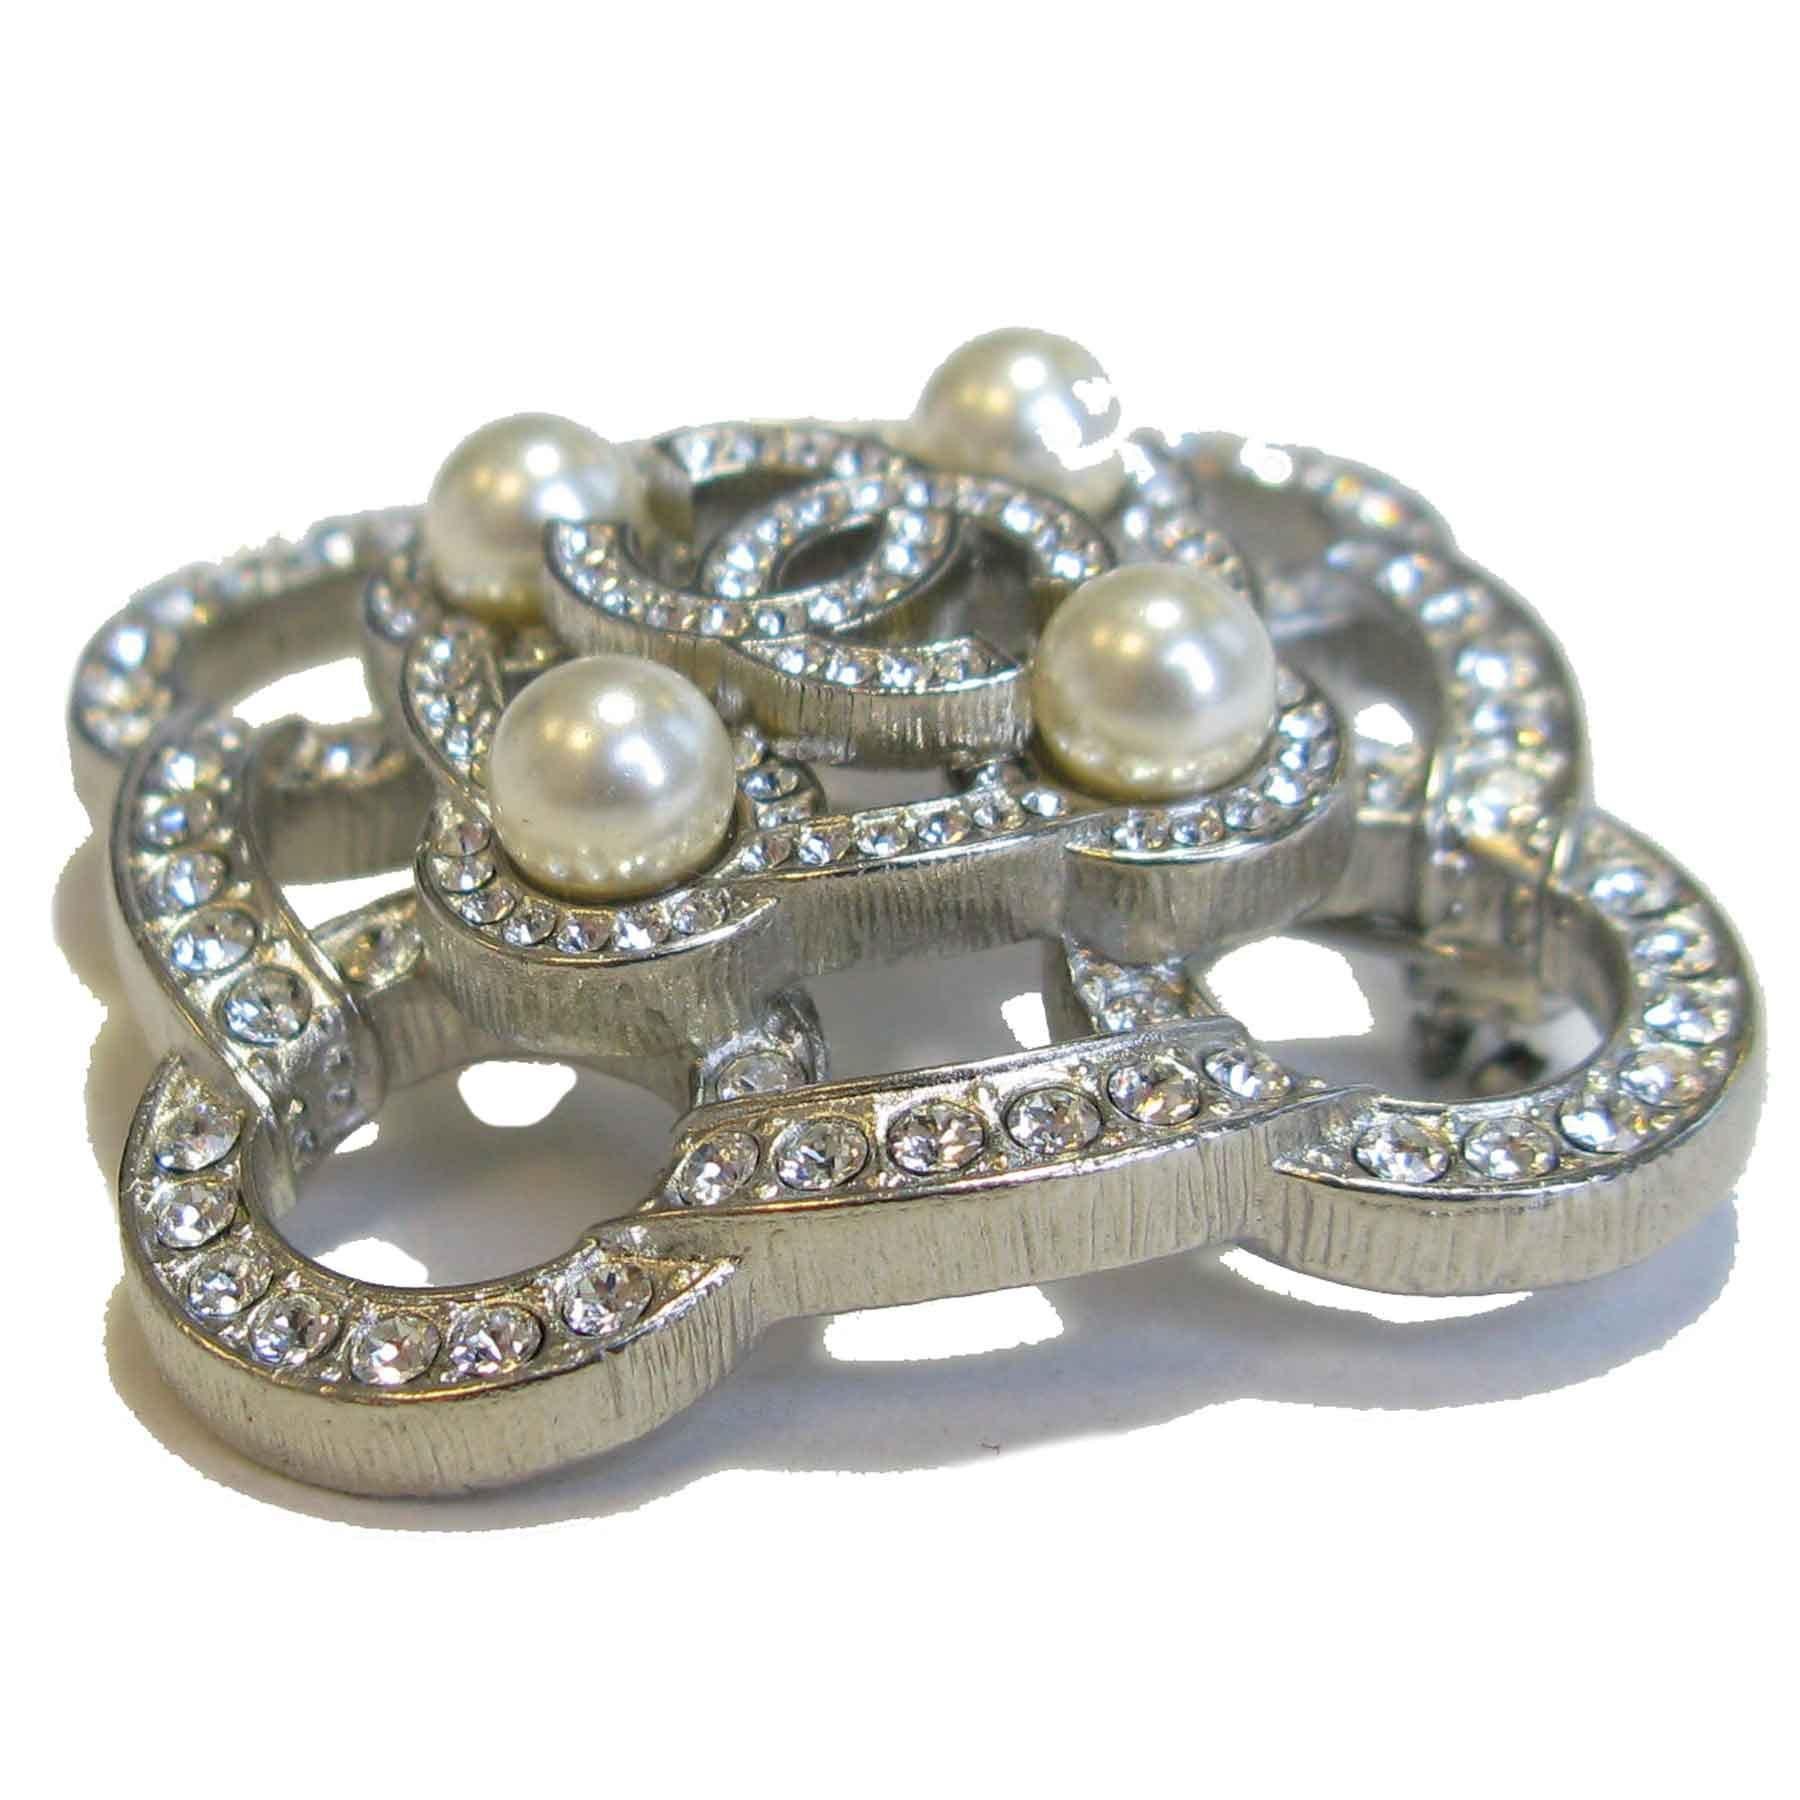 Superb Chanel brooch couture. A silver plated CC set with rhinestones and pearls of various sizes. A splendor worn on a jacket or a t-shirt. 
 Fall 2018 collection. Made In France.
This CC Chanel brooch is like new. 
The stamp is present.